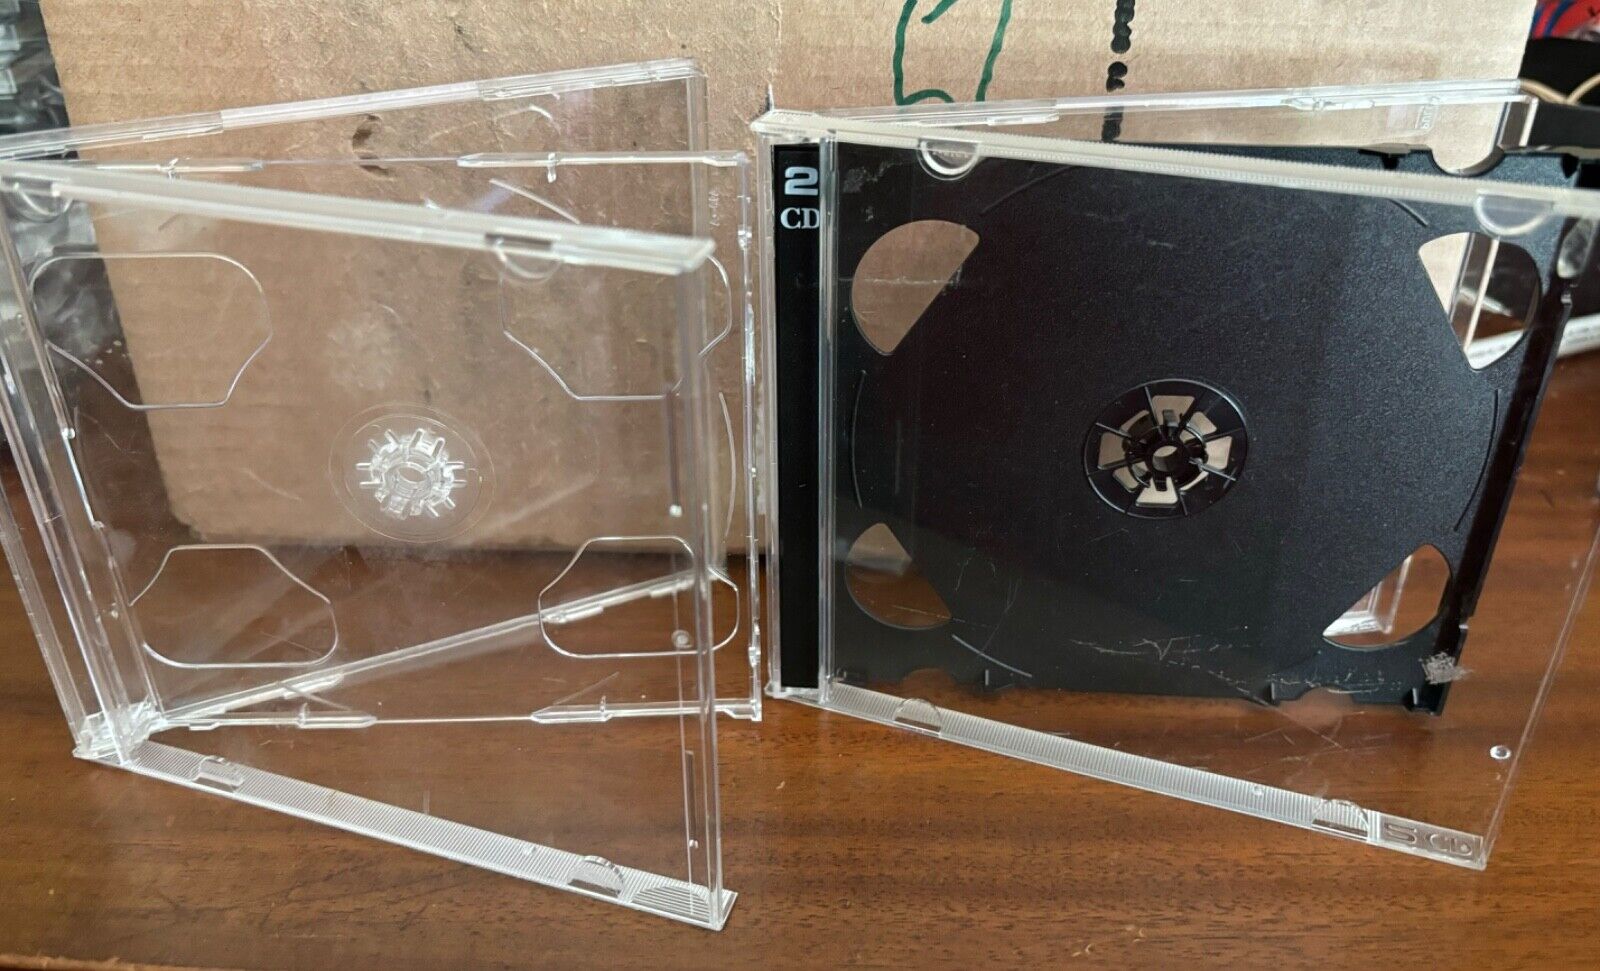 20 Empty Double CD Jewel Cases - Used - Black or clear trays - 15.99